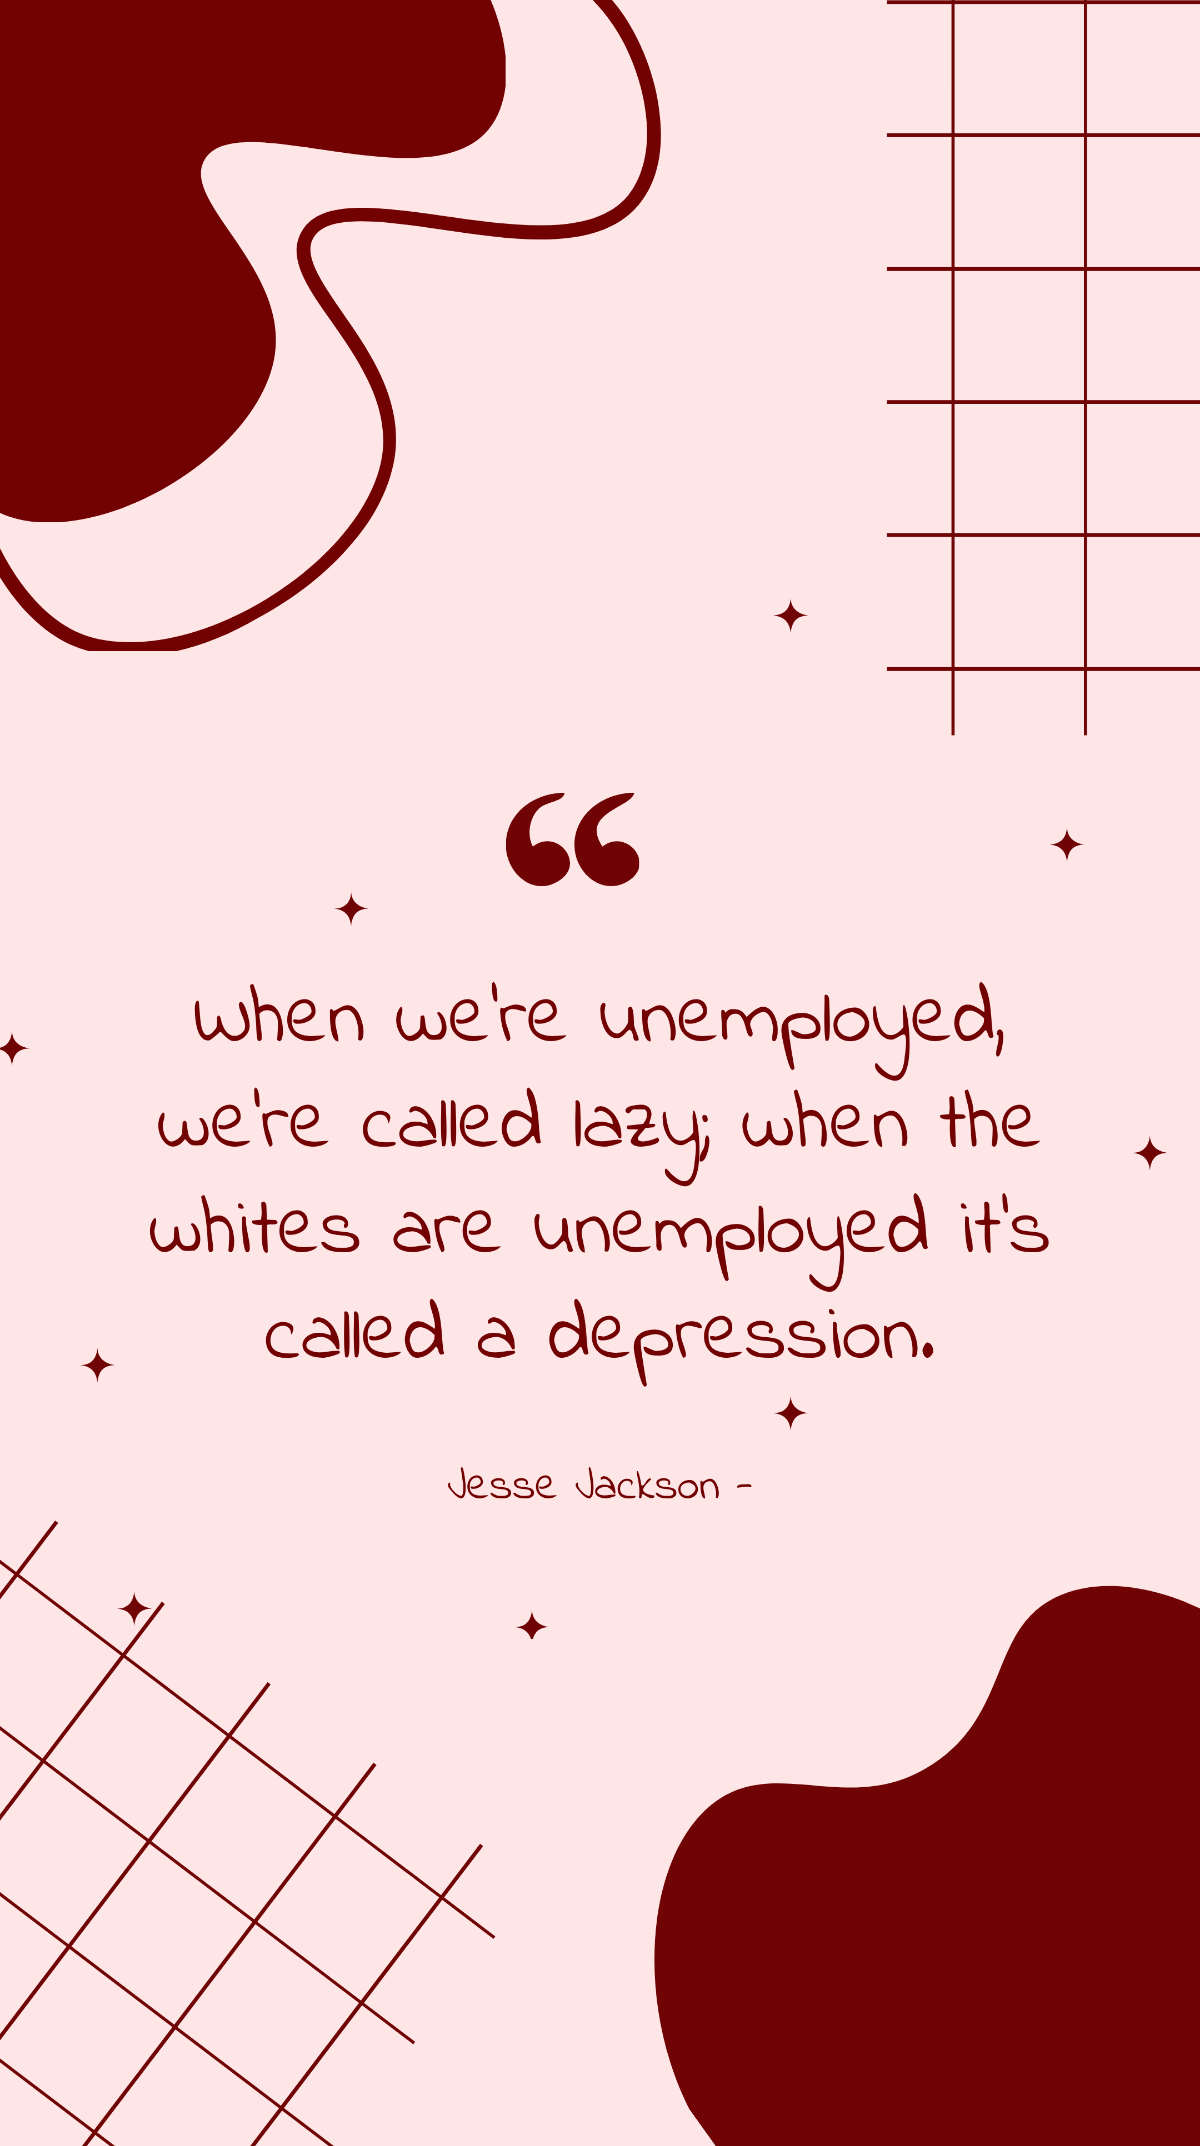 Jesse Jackson - When we're unemployed, we're called lazy; when the whites are unemployed it's called a depression. Template